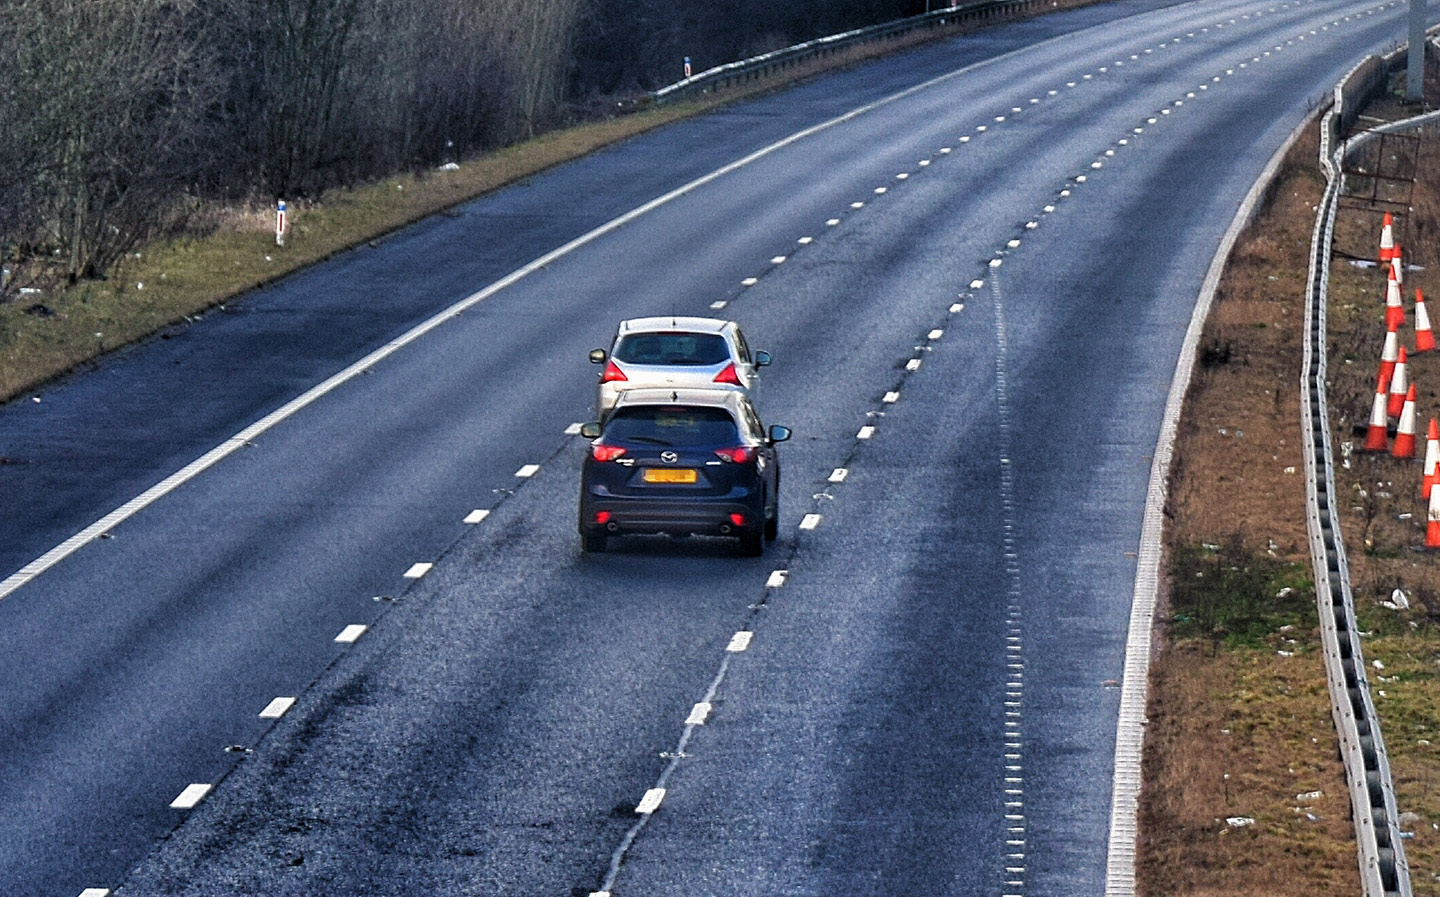 London tops table of middle lane hoggers on motorways